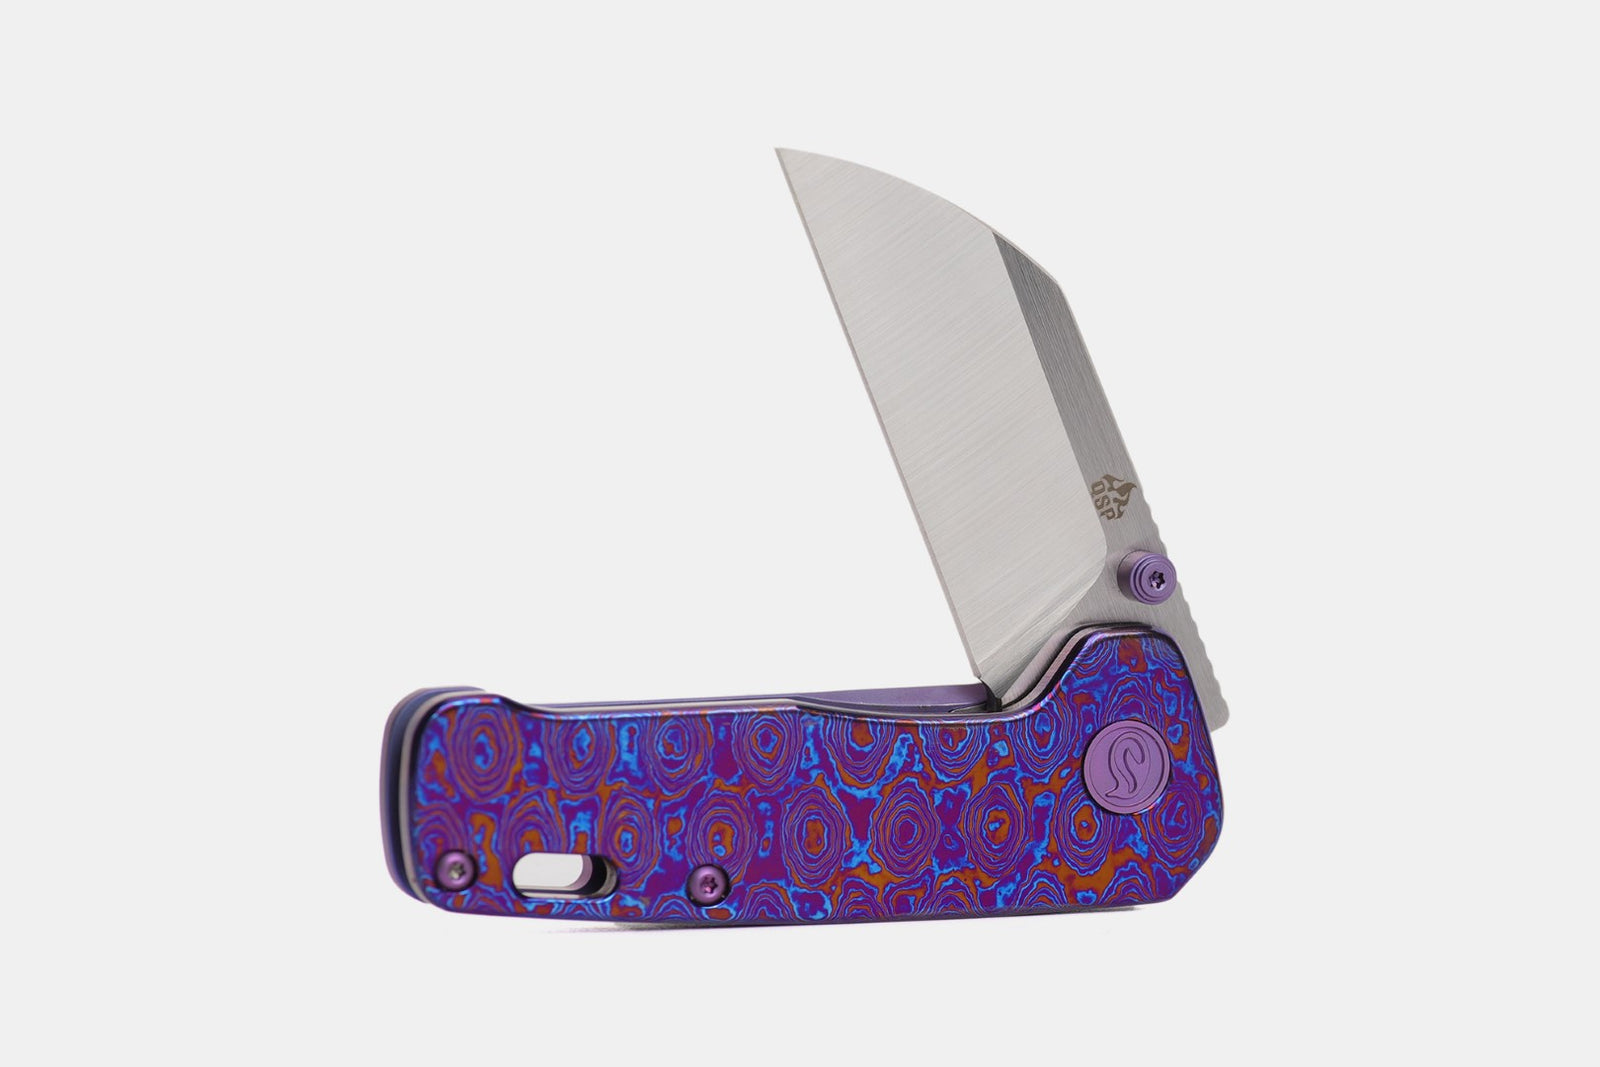 Kaviso x QSP Penguin Mini with full Mokuti show side and clip. Clip-side handle is purple anodized titanium with S35VN Stonewashed blade and purple Ti hardware accents